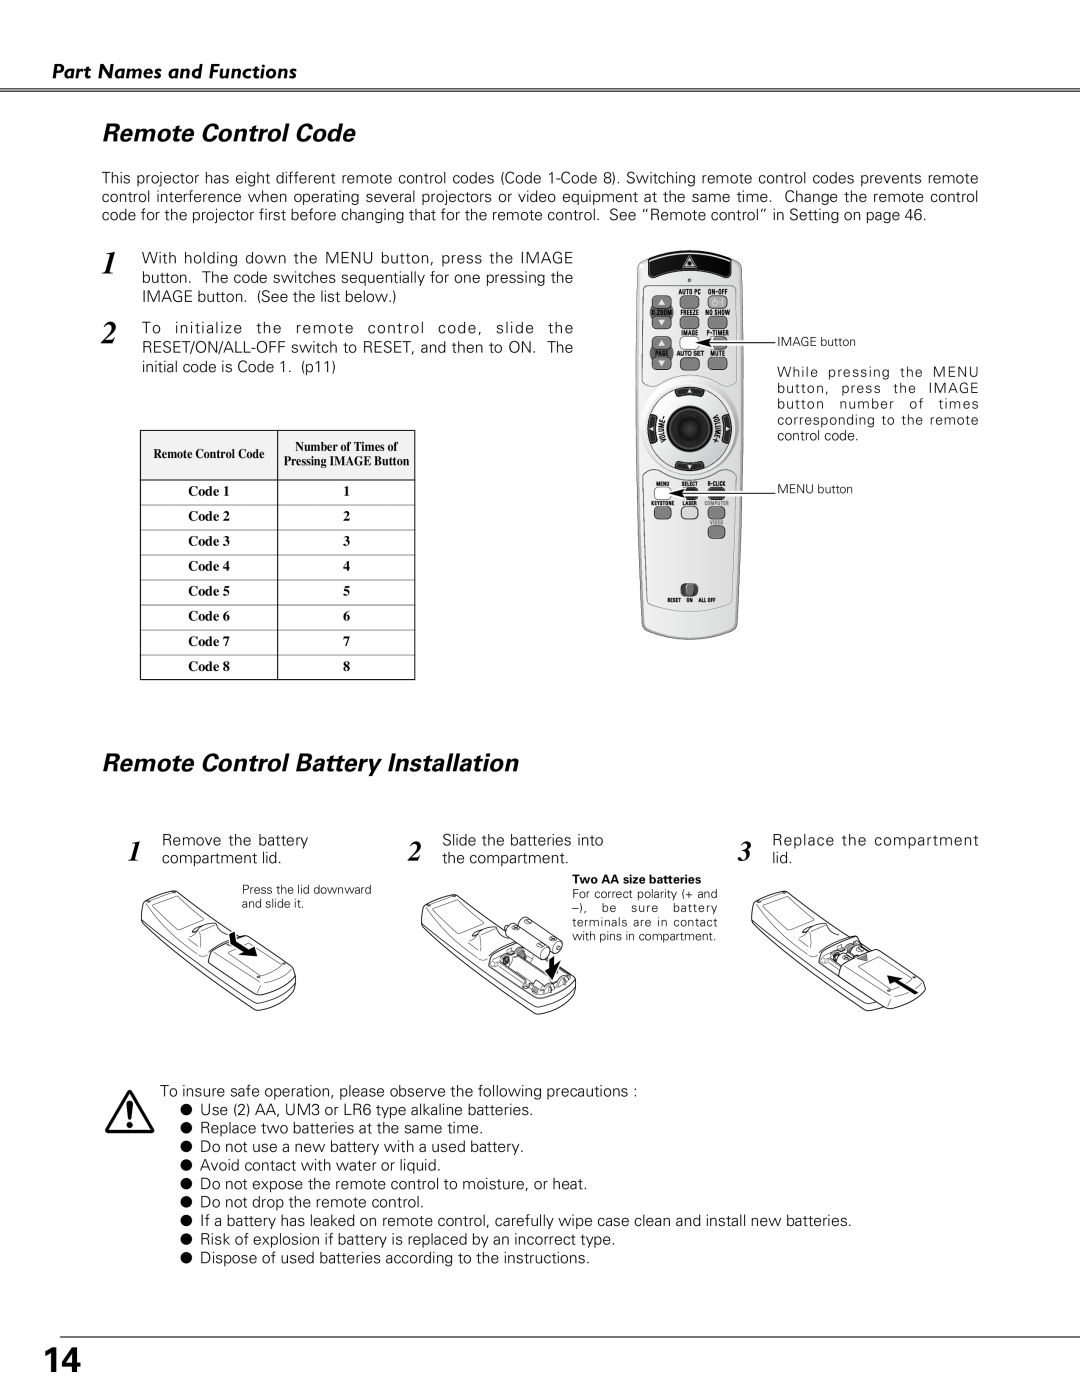 Eiki LC-SB21 Remote Control Code, Remote Control Battery Installation, Part Names and Functions, To initialize the 